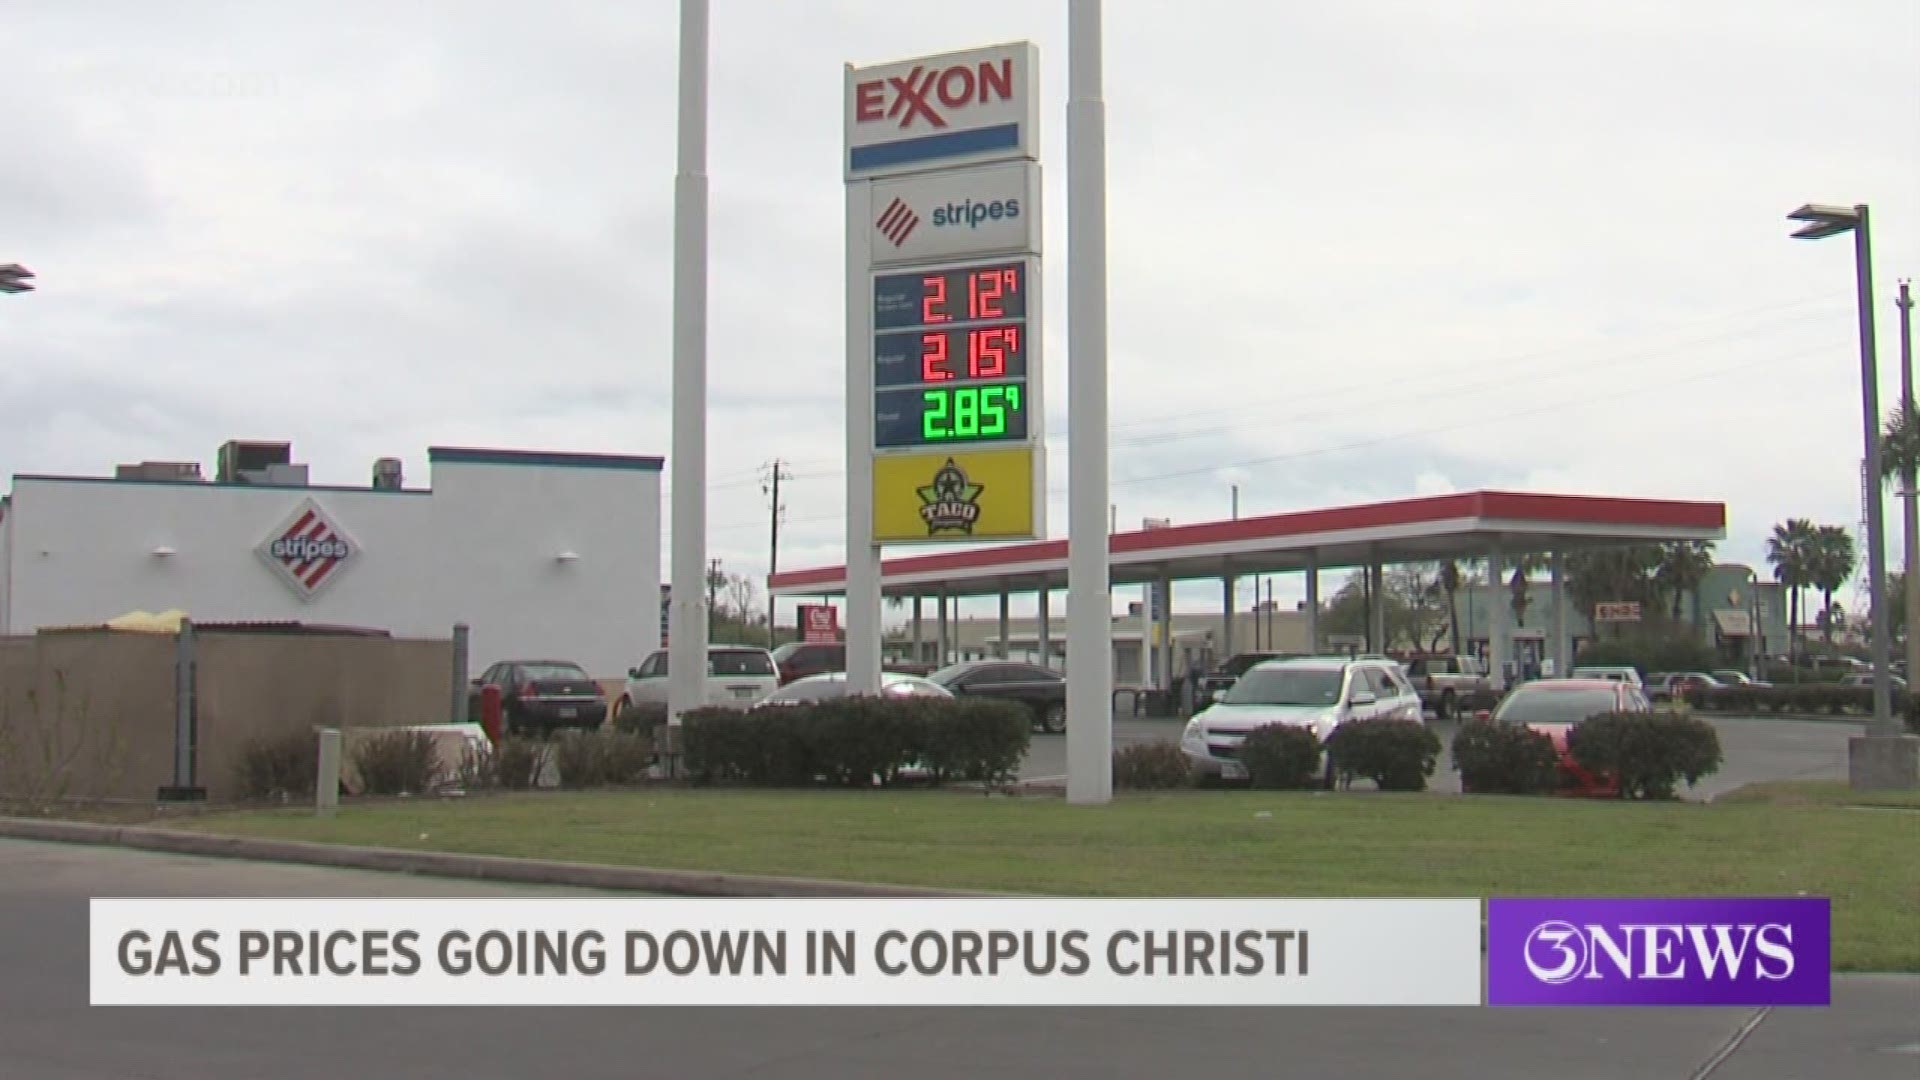 Gas prices are going down in Corpus Christi, which is a relief for drivers.